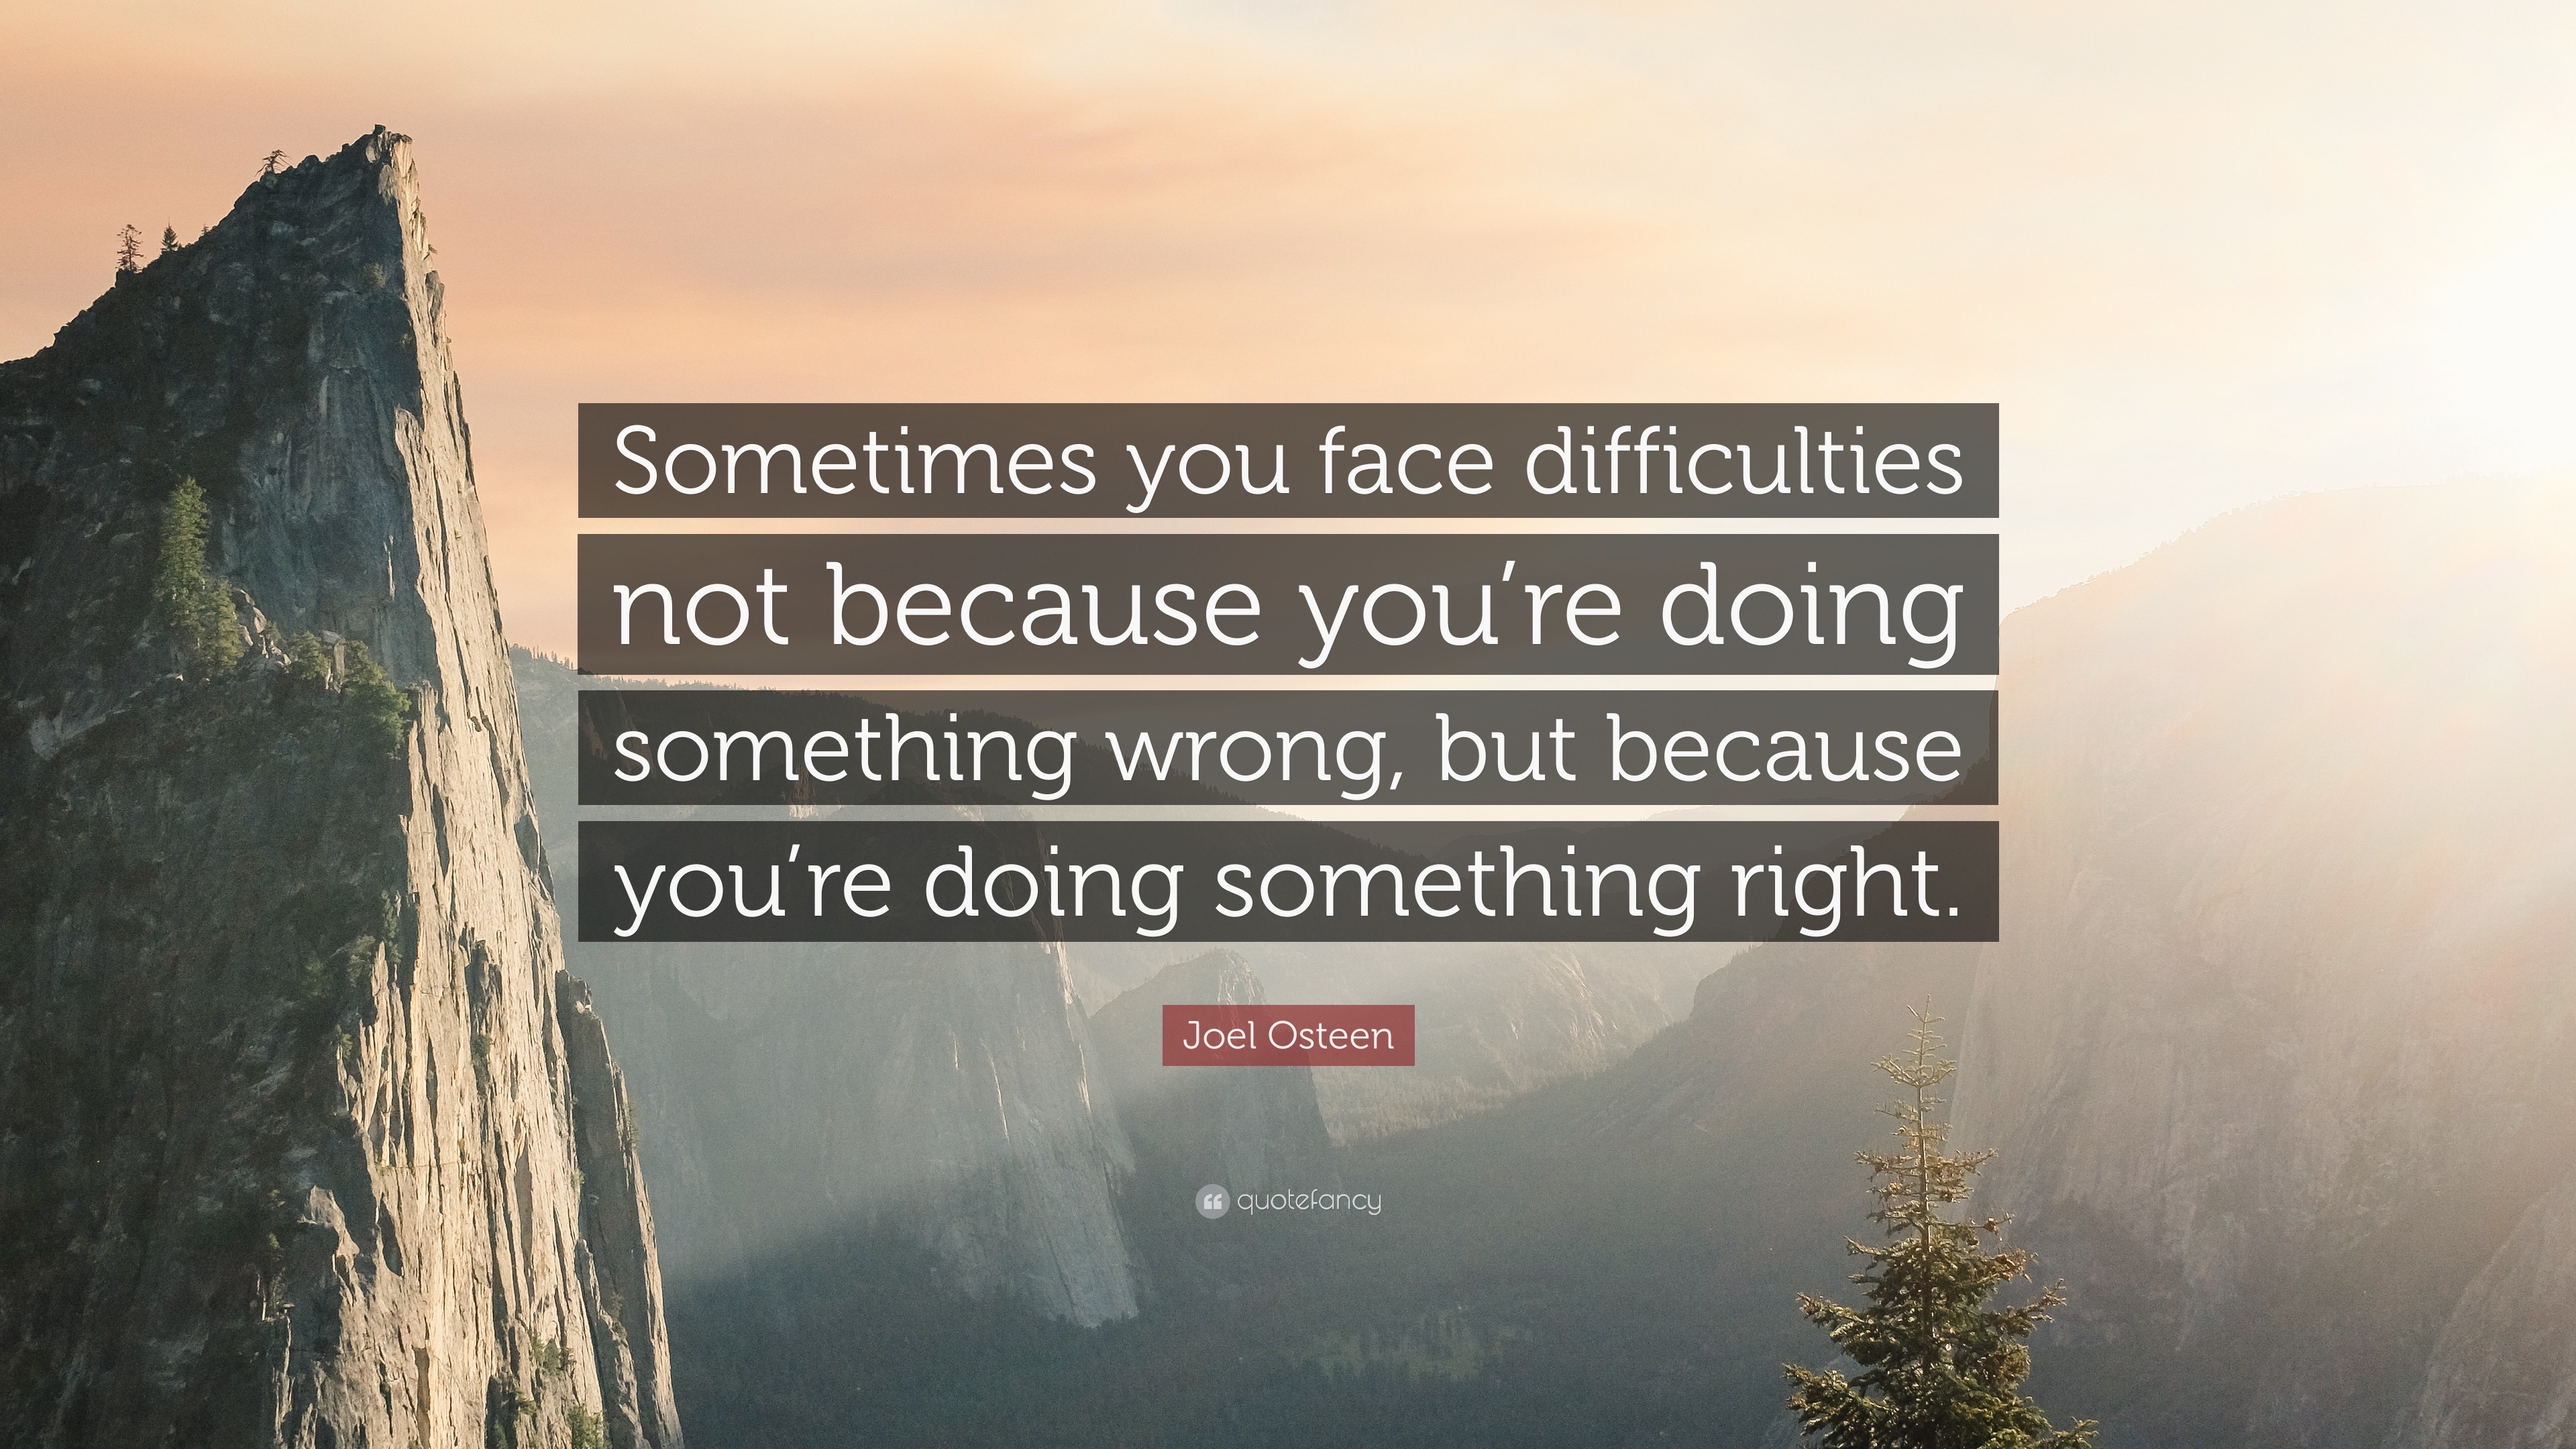 Joel Osteen Quote: “Sometimes you face difficulties not because you’re